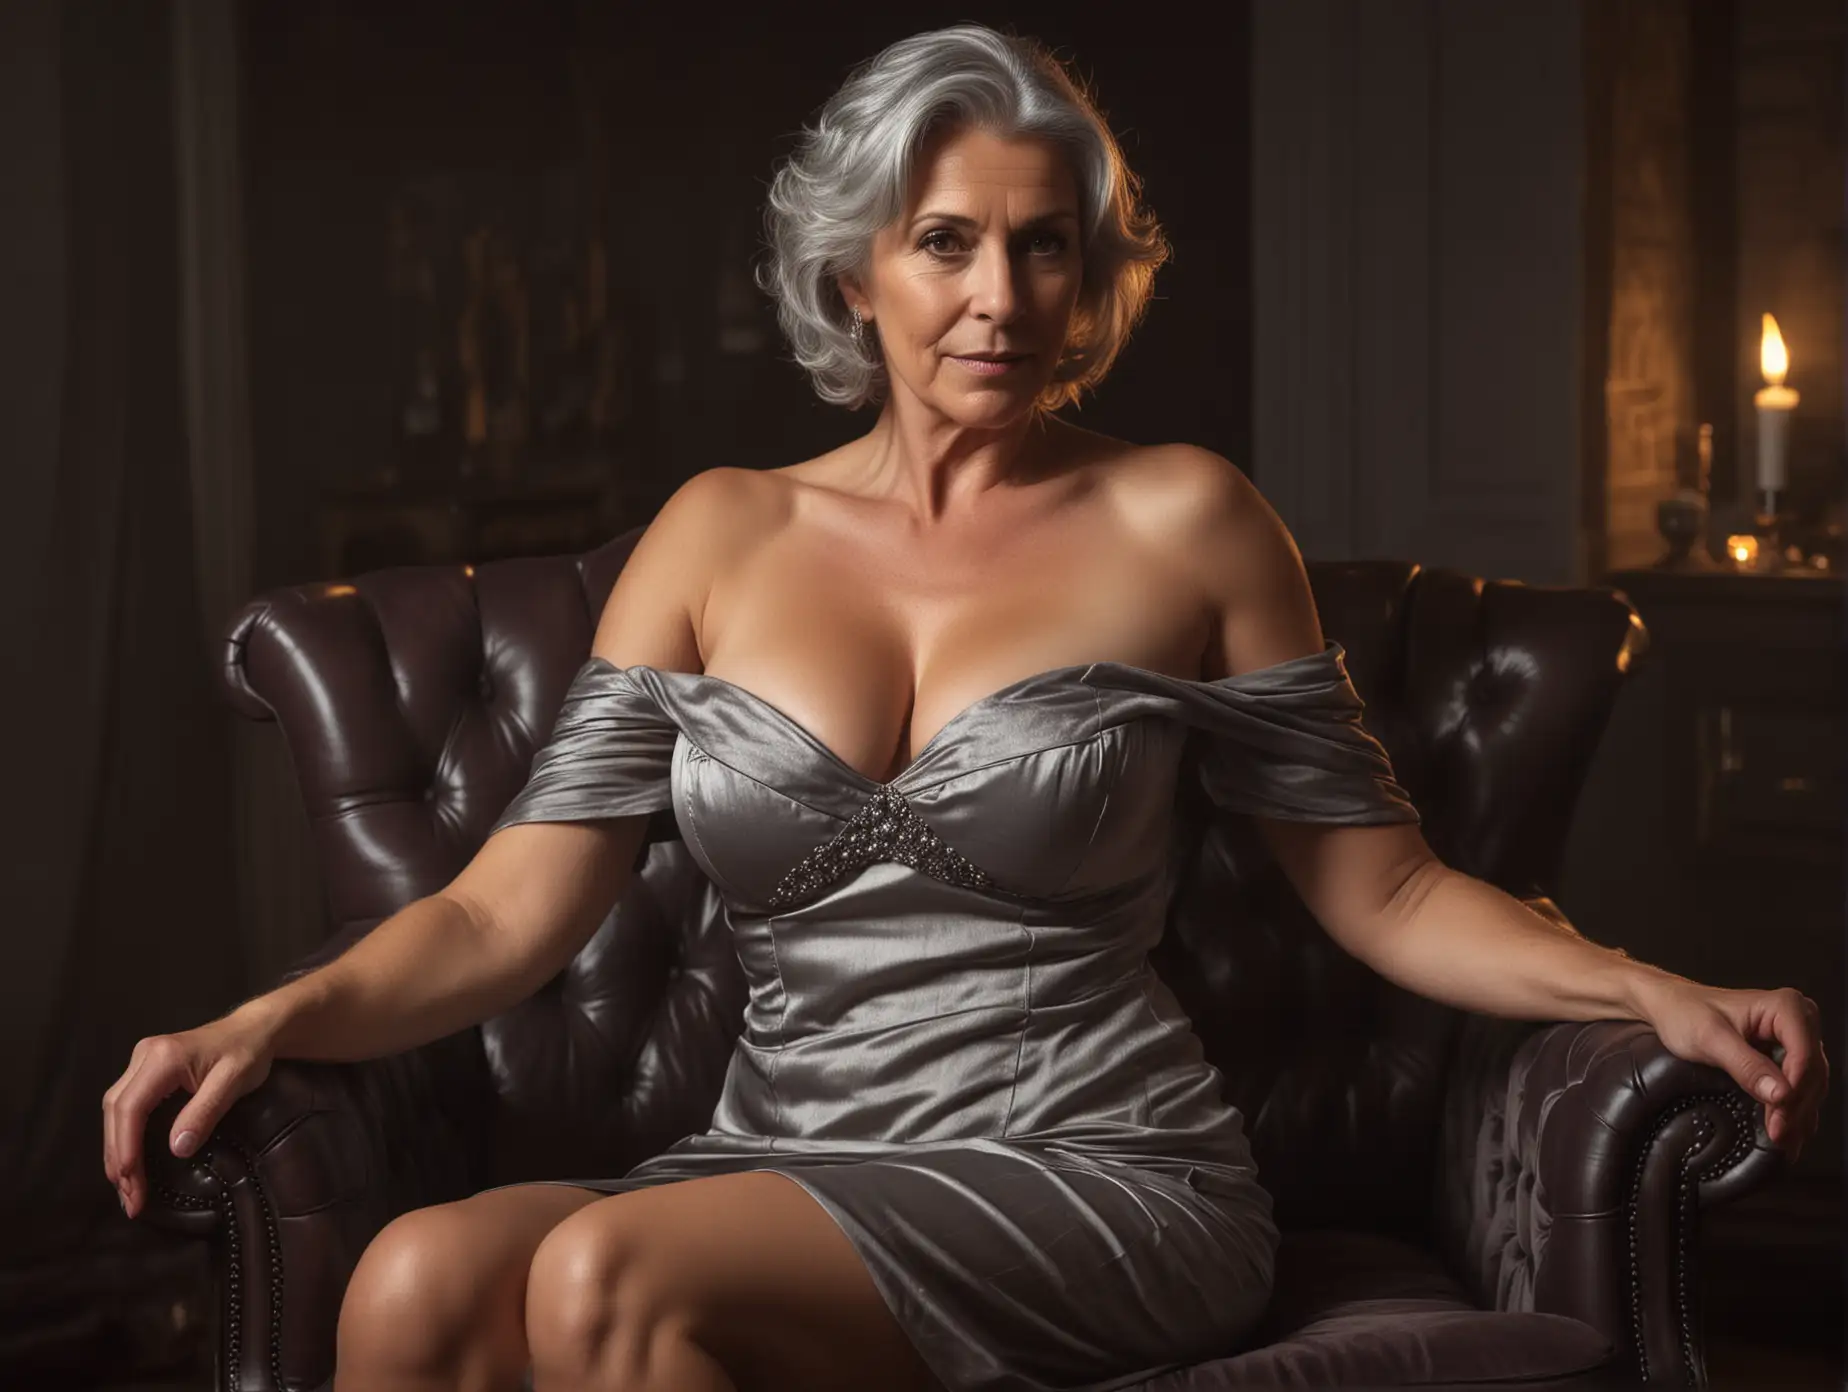 Mature Woman in Elegant Revealing Pose by Firelight